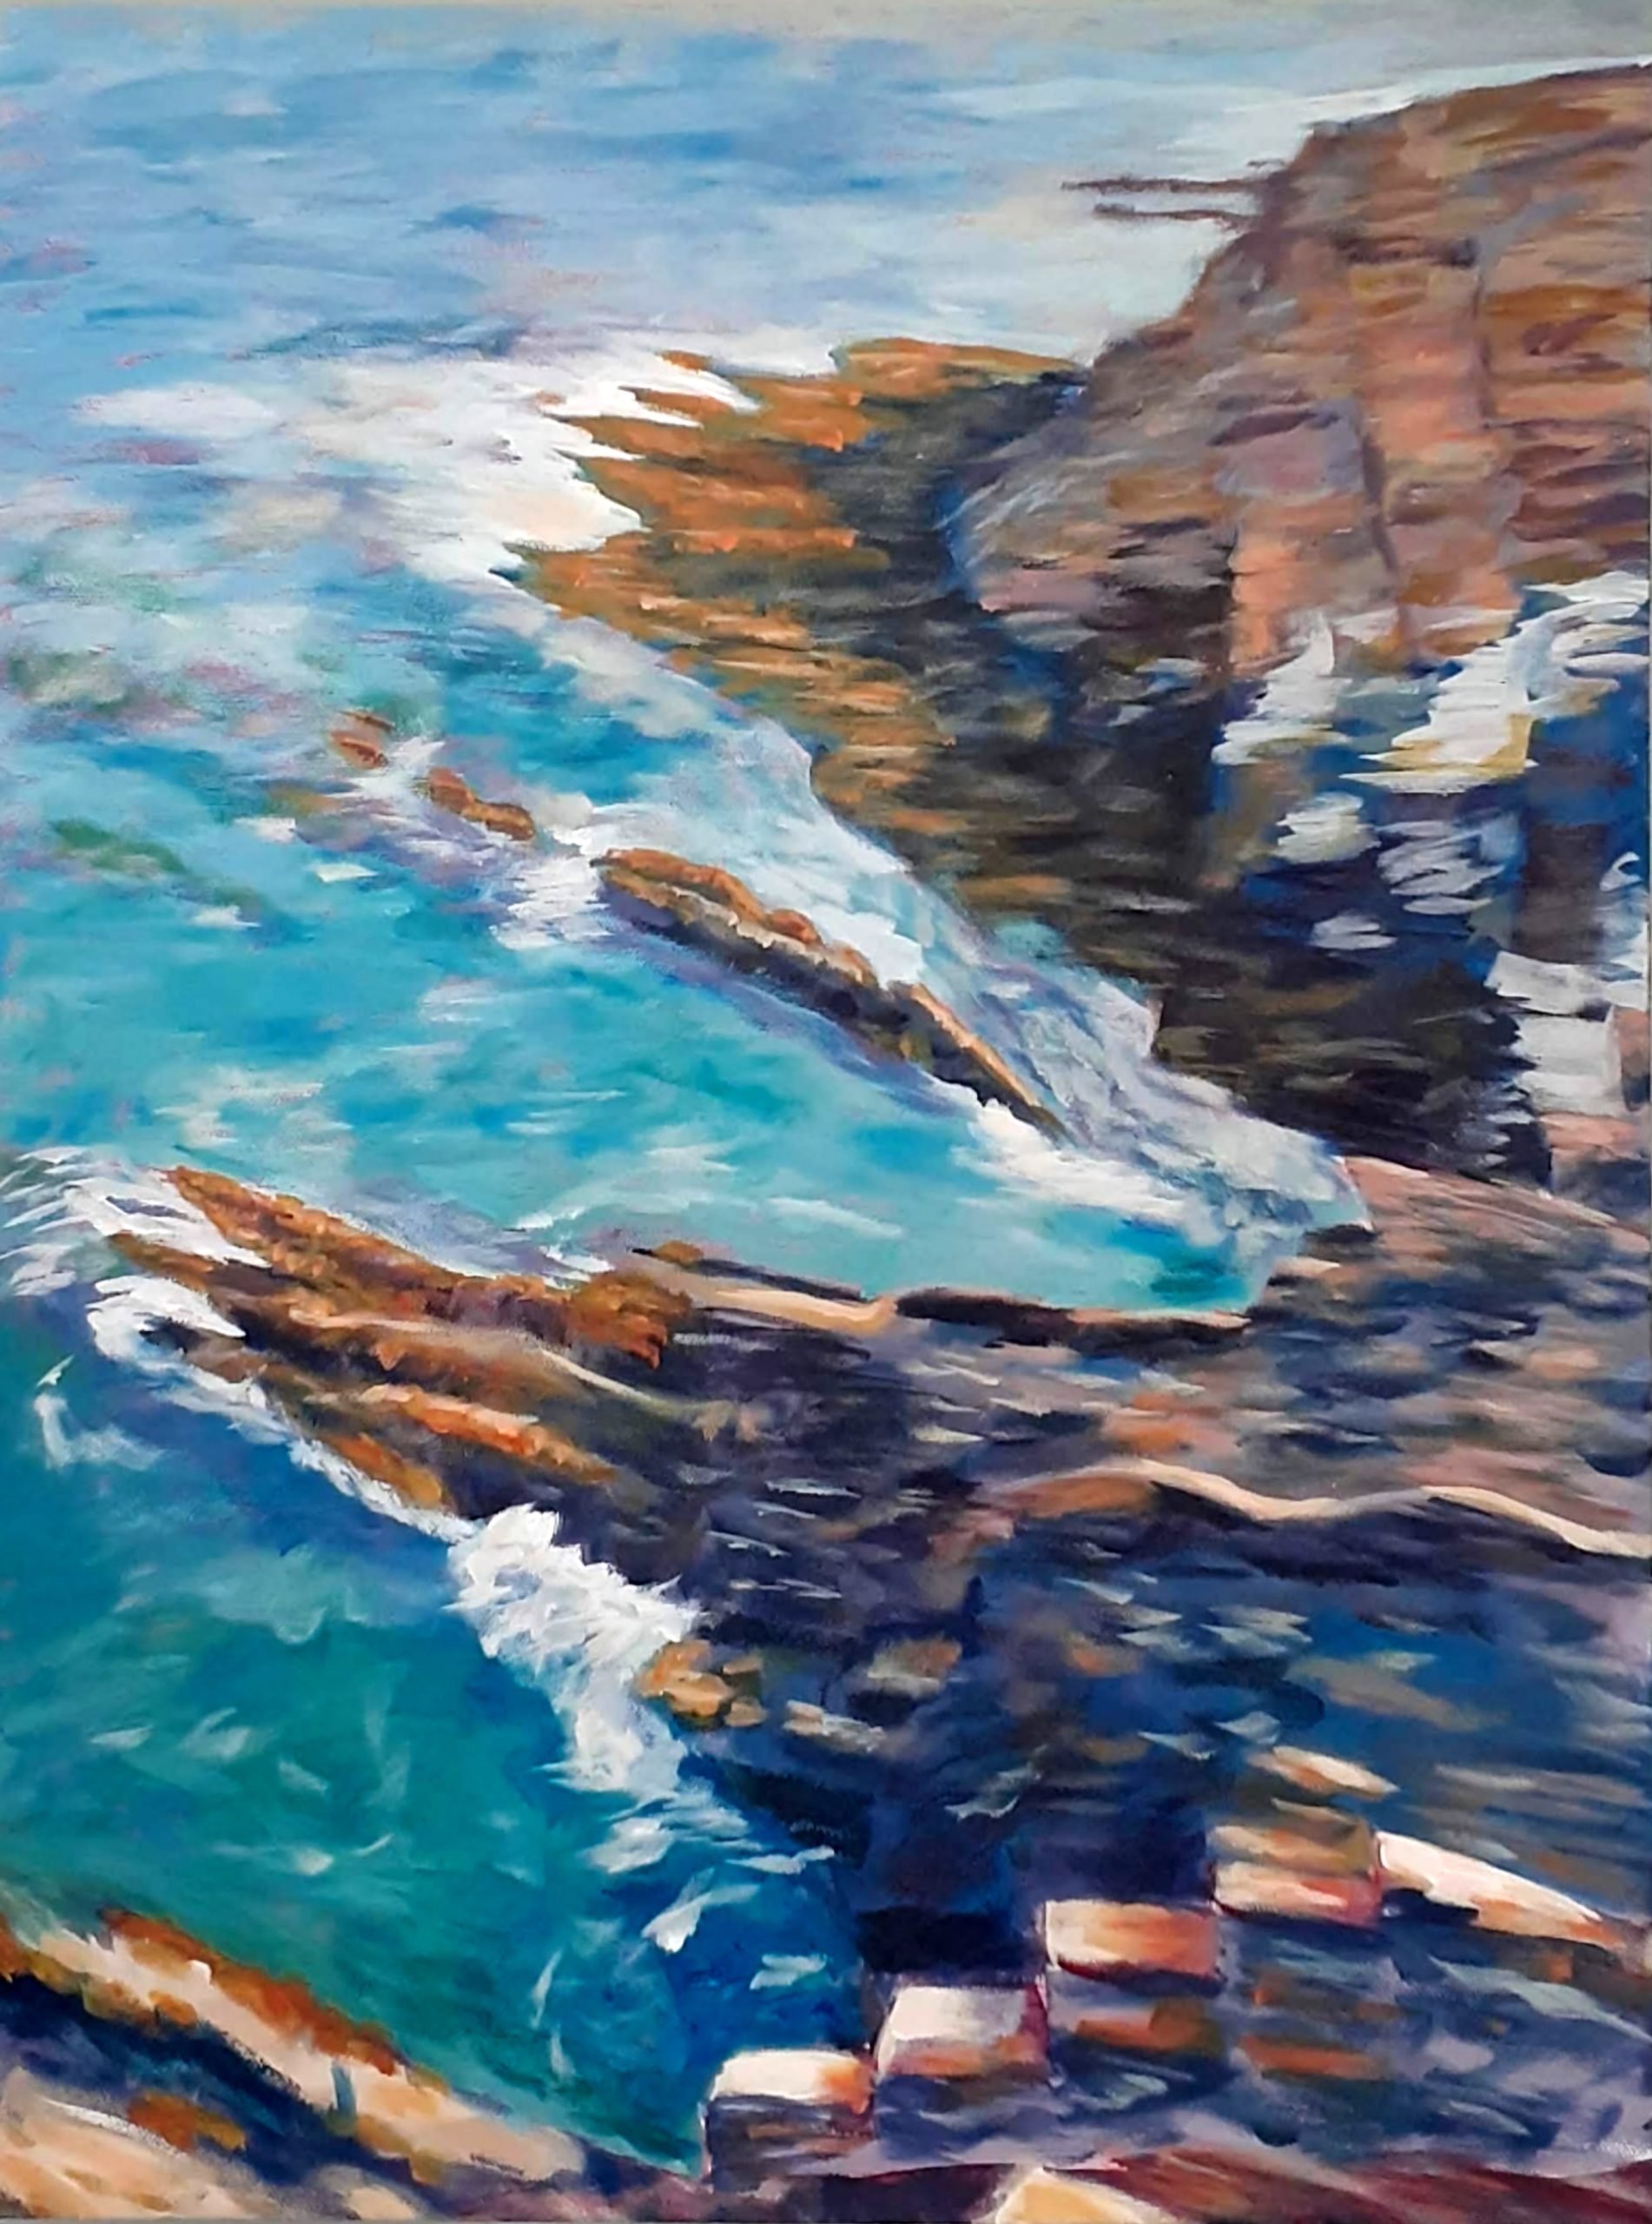 A top down painting of the ocean, as it crashes against a cliffside shore.